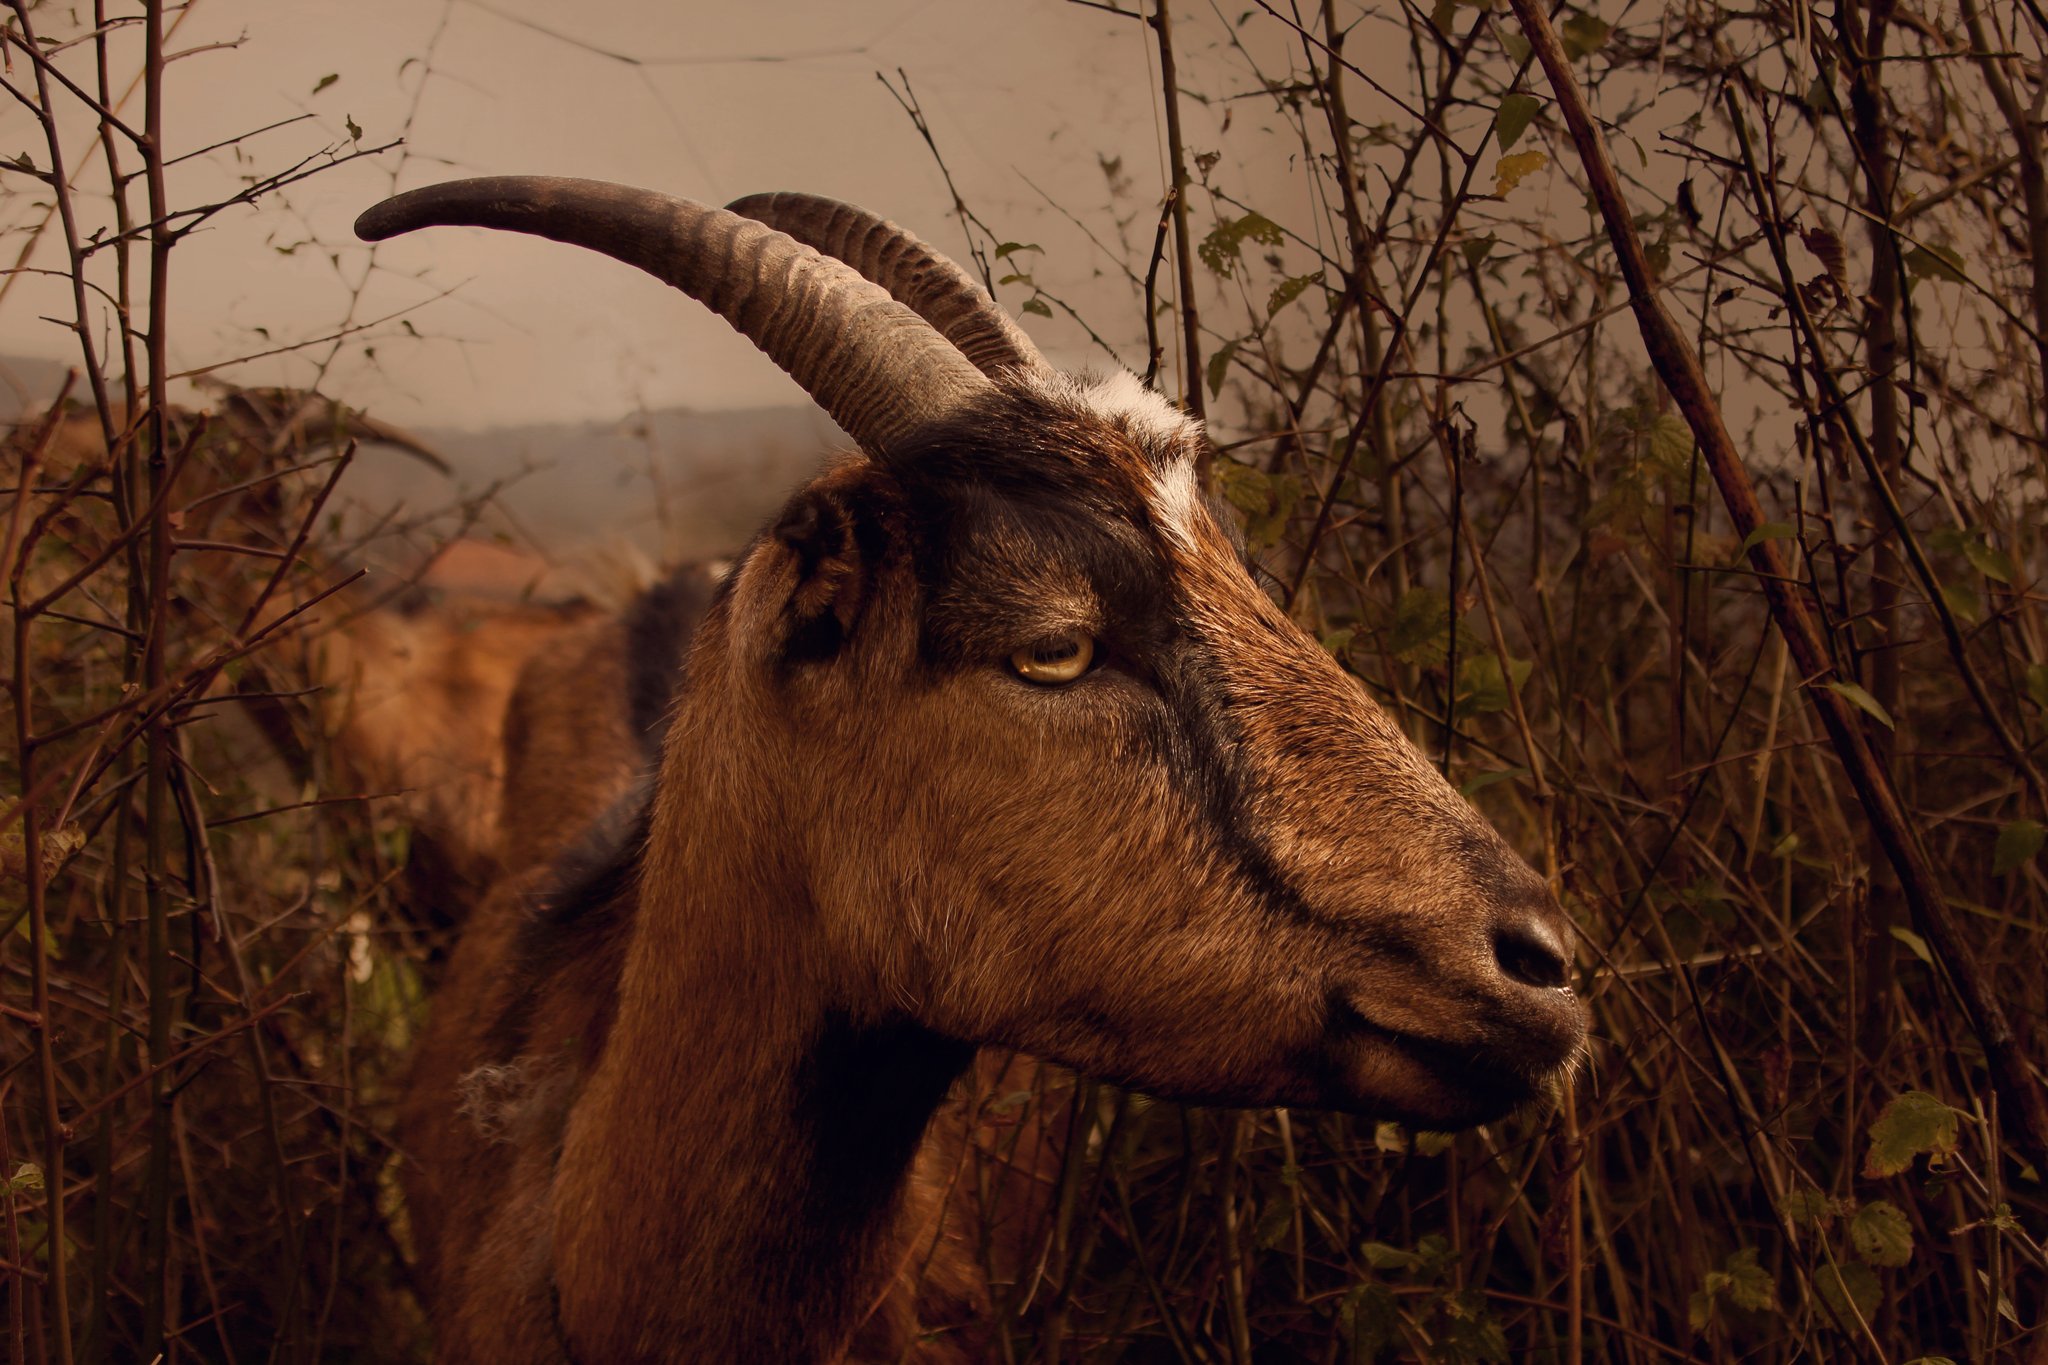 goat, alpine, grazing, bush, close up, eye, horn, village, outdoor, lovely, tear in the eye, domestic, serbia, farm, cloudy, muzzle, sepia, brown, toned, color, curious,, Марко Радовановић